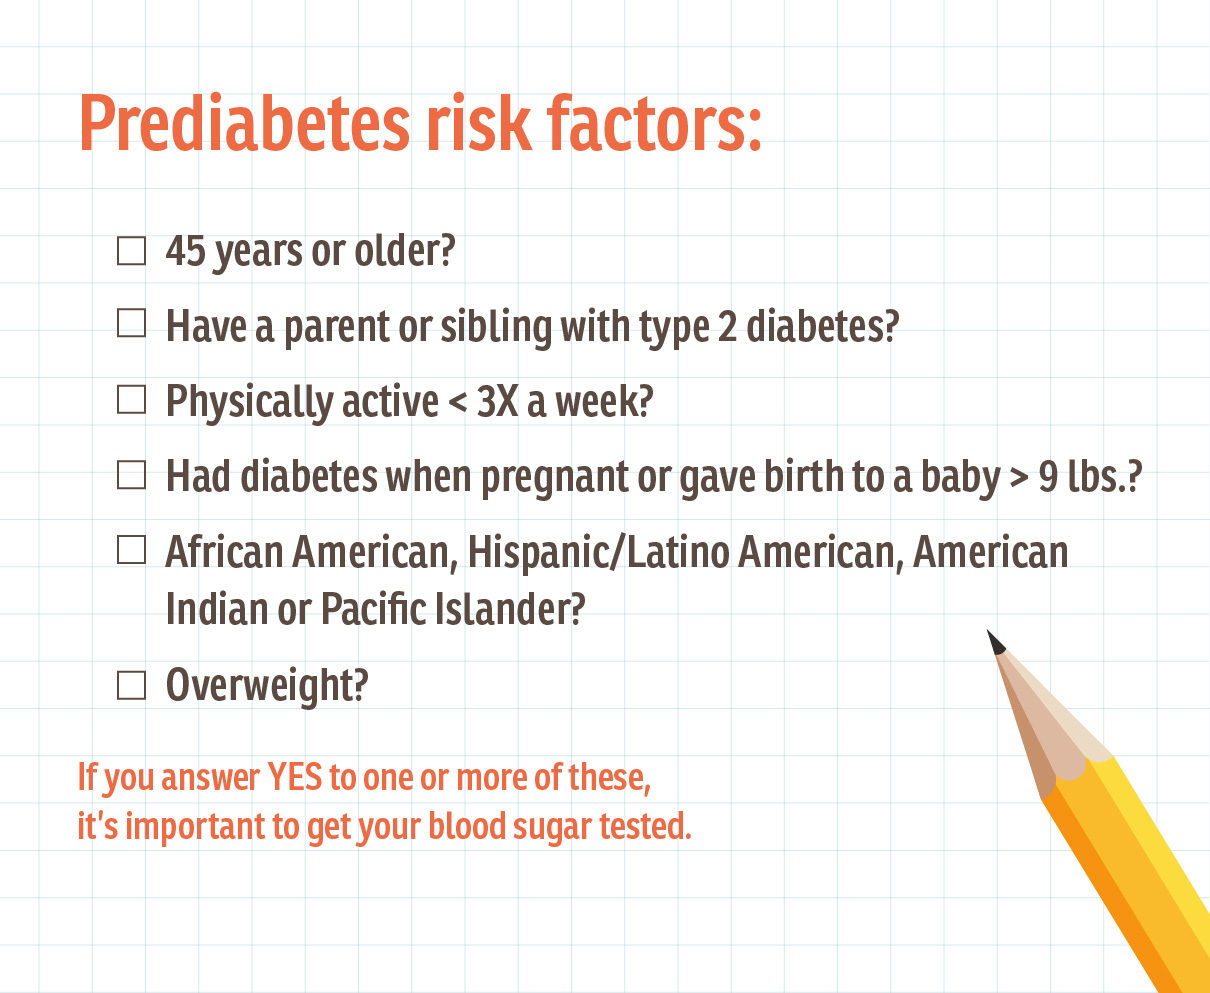 A Prediabetes risk factors checklist that lists out questions starting with 45 years or older? Have a parent or sibling with type 2 diabetes? Physically active less than three times a week? Had diabetes when pregnant or gave birth to a baby less than 9 pounds? African American, Hispanic Latino American, American Indian or Pacific Islander? Overweight? If you answer YES to one or more of these, it's important to get your blood sugar tested.